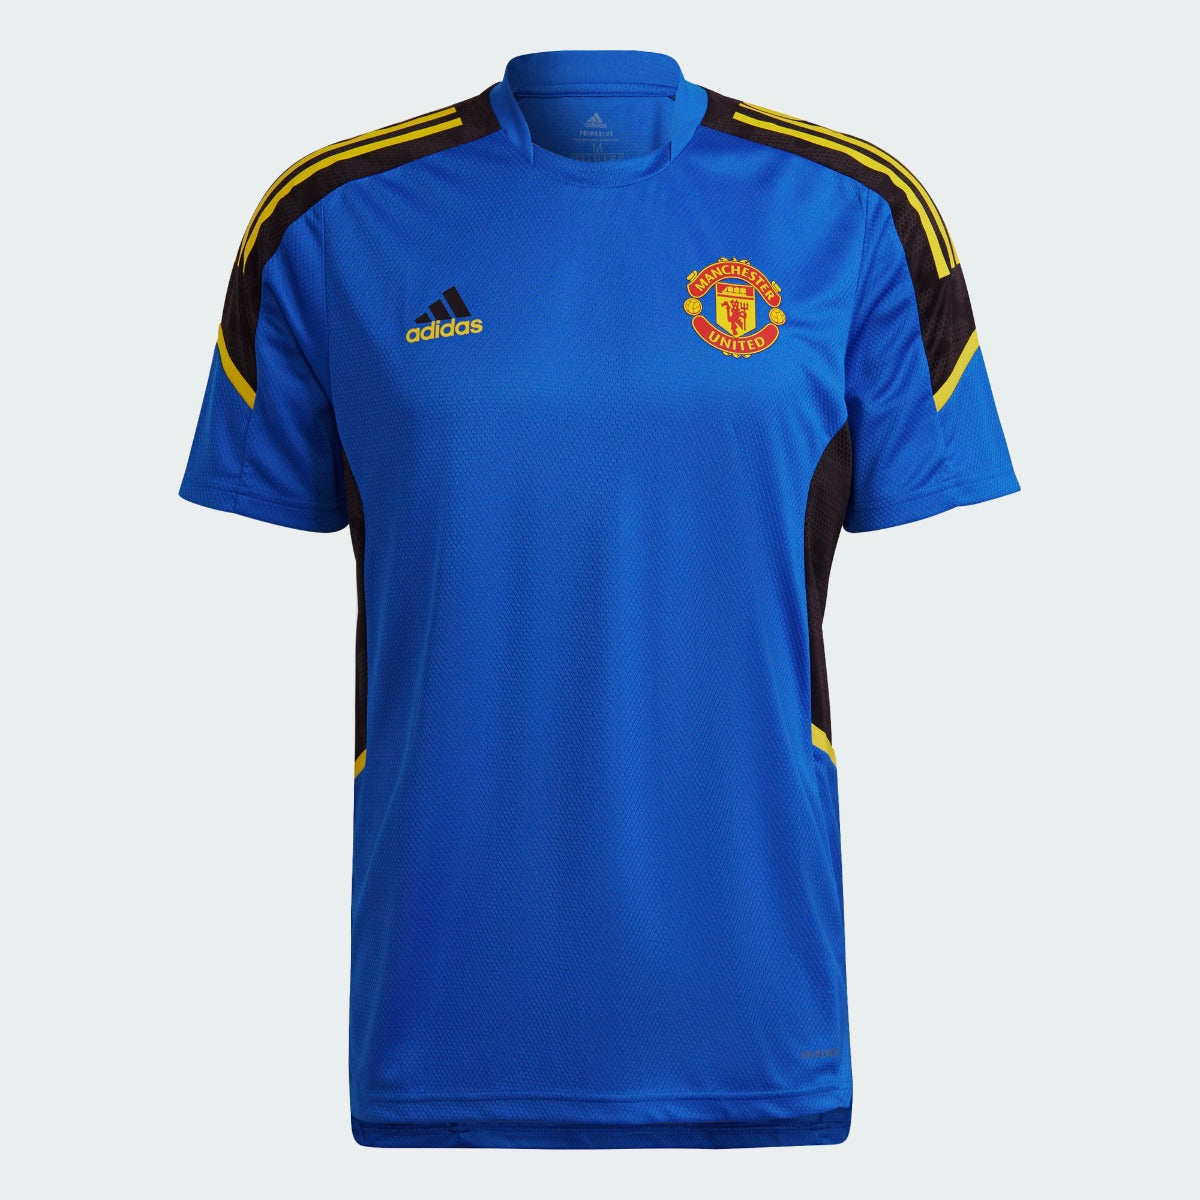 Adidas 2021-22 Manchester United Euro Training Jersey - Glow Blue (Front)